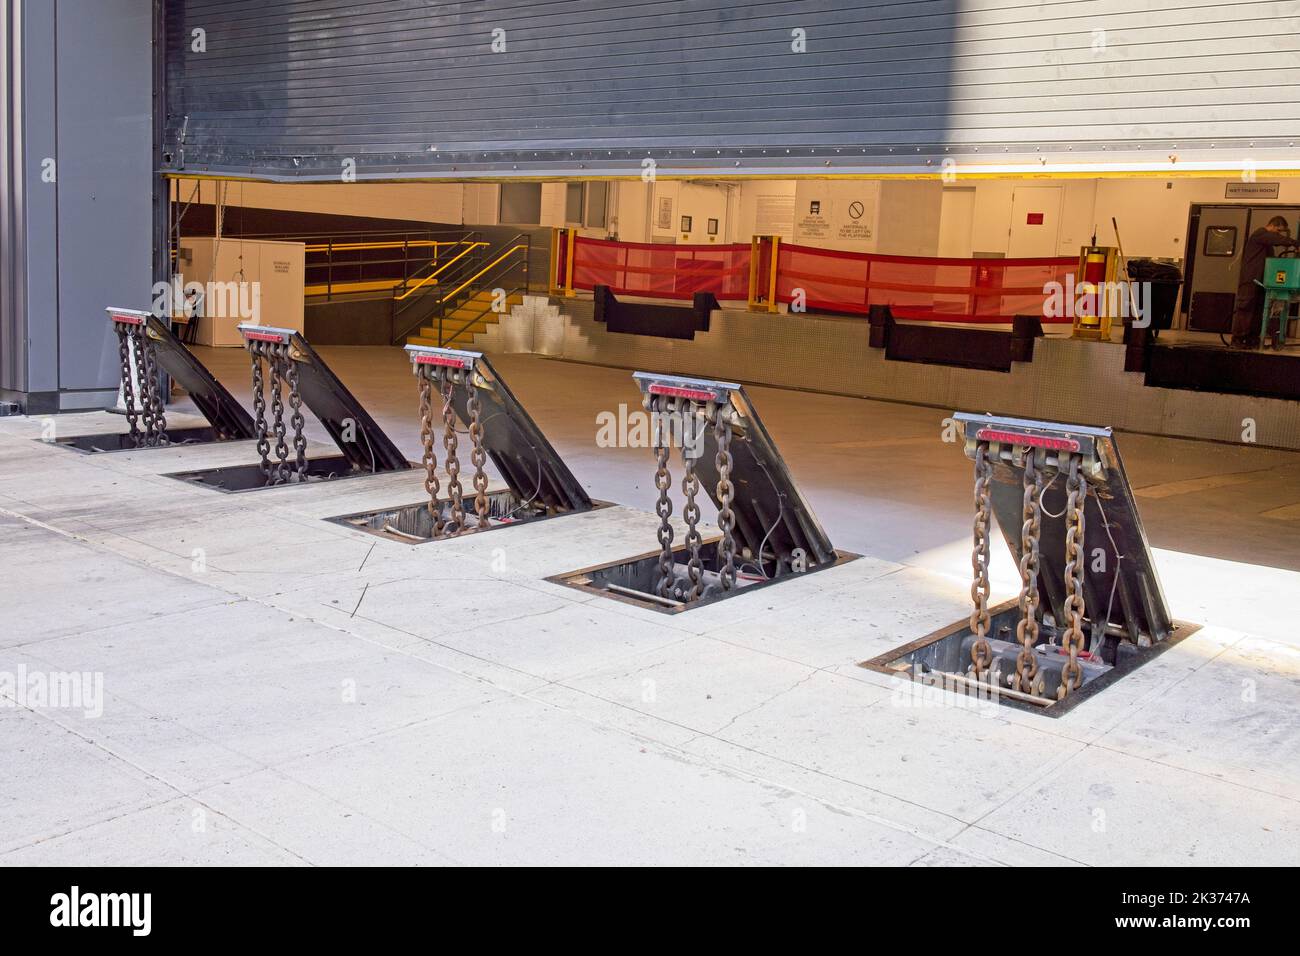 New York, NY, USA - Sept 24, 2022: A series of electronically controlled barricades prevent unauthorized entry into a building loading dock Stock Photo